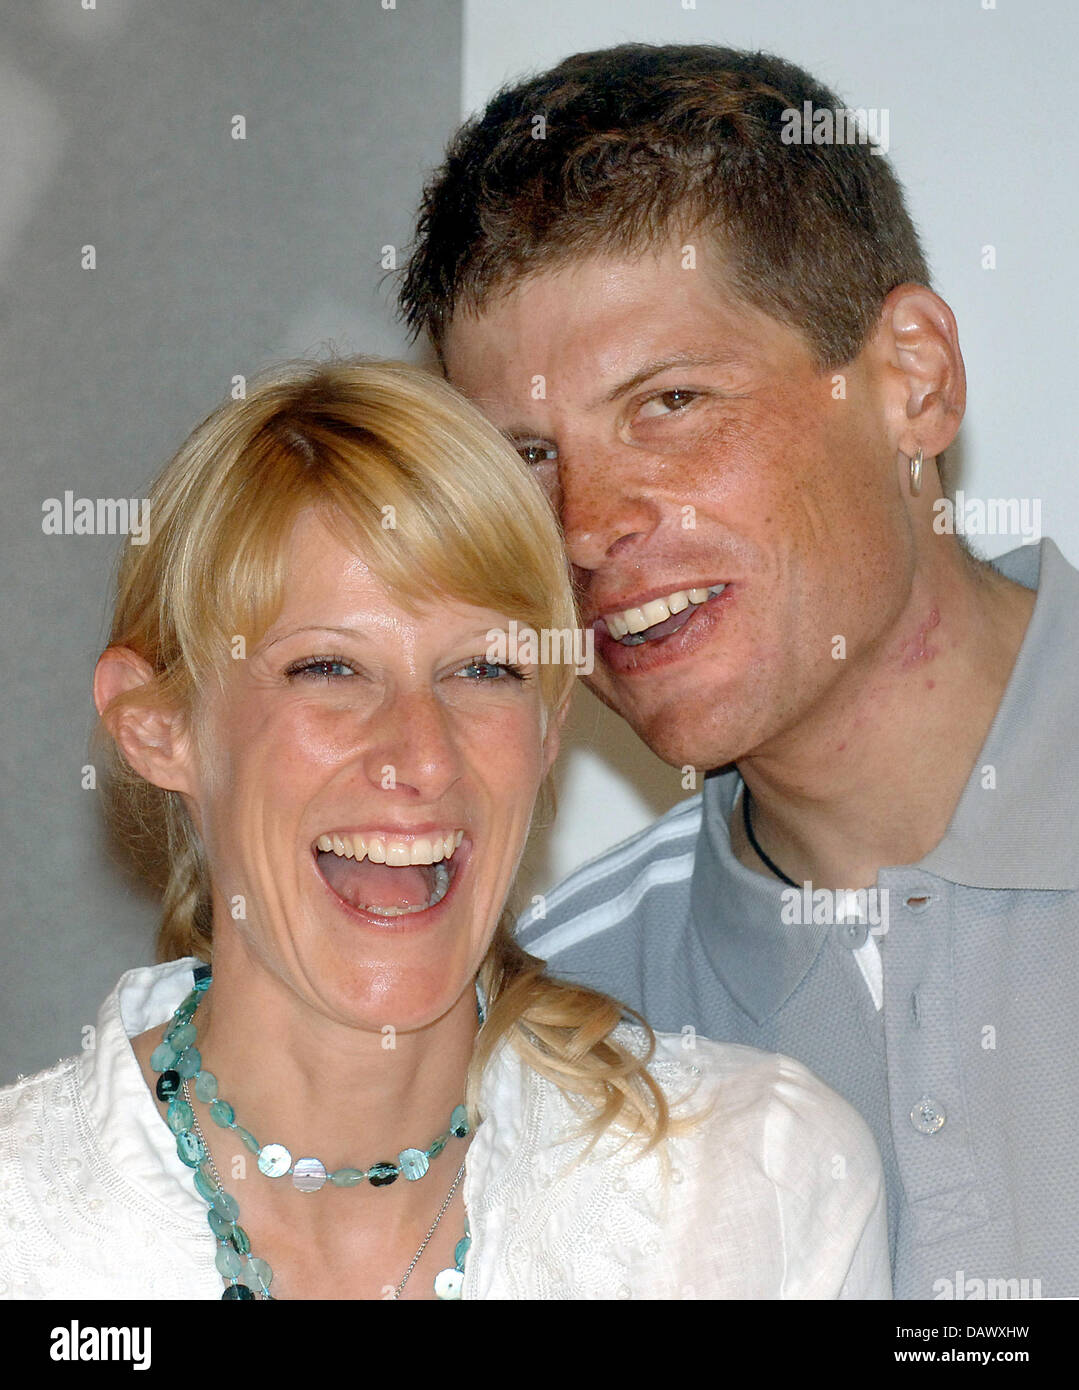 FILE - Jan Ullrich and his wife Sara Steinhauser pose at a reception in Bonn, Germany, 25 July 2005. Ullrich commented on private family bliss on his homepage, 11 May 2007, after four weeks of silence following his contended retirement. His pregnant wife Sara expects their child in September.  Photo: Felix Heyder Stock Photo